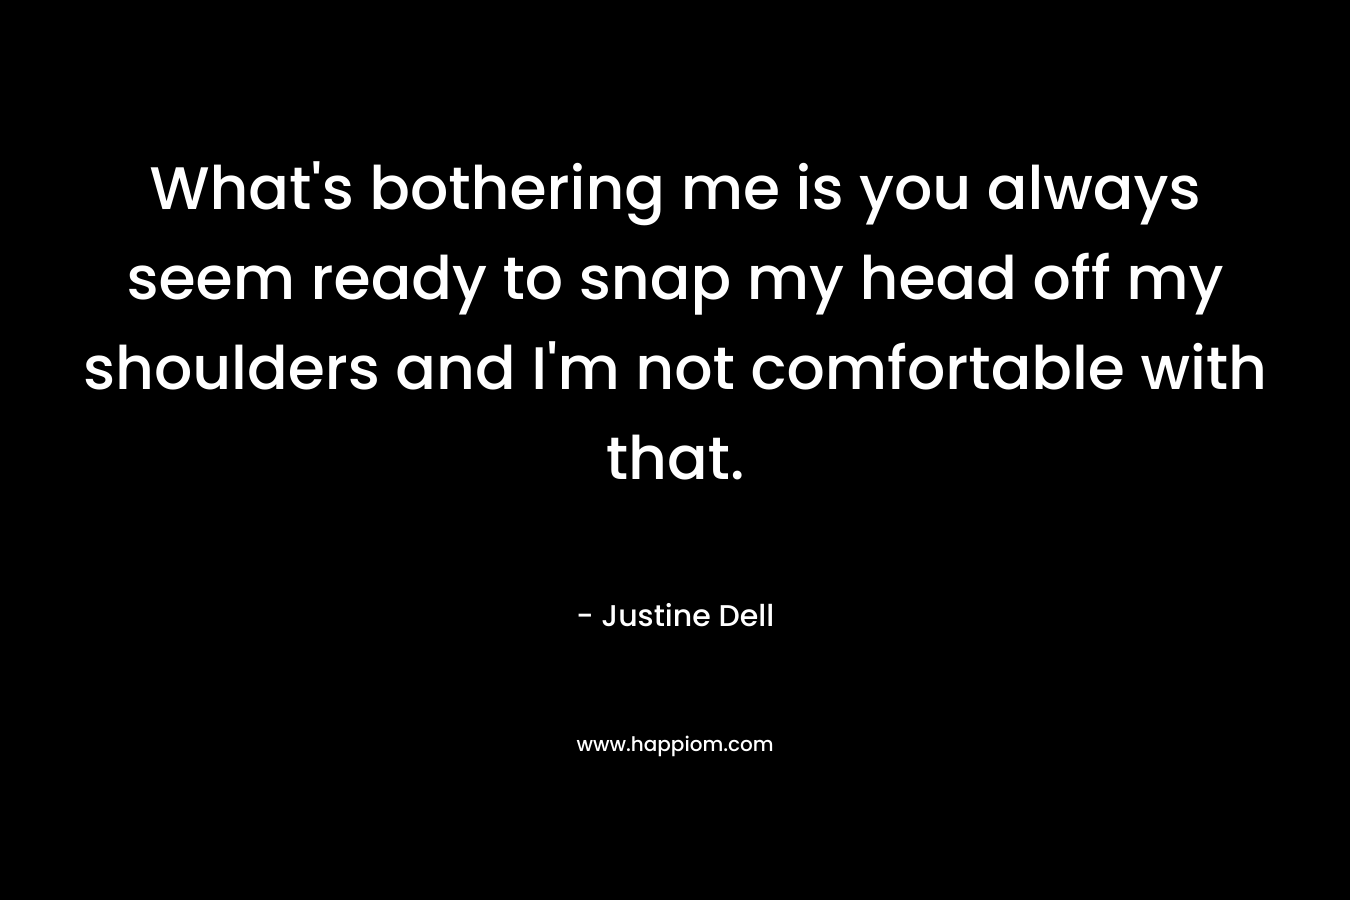 What’s bothering me is you always seem ready to snap my head off my shoulders and I’m not comfortable with that. – Justine Dell